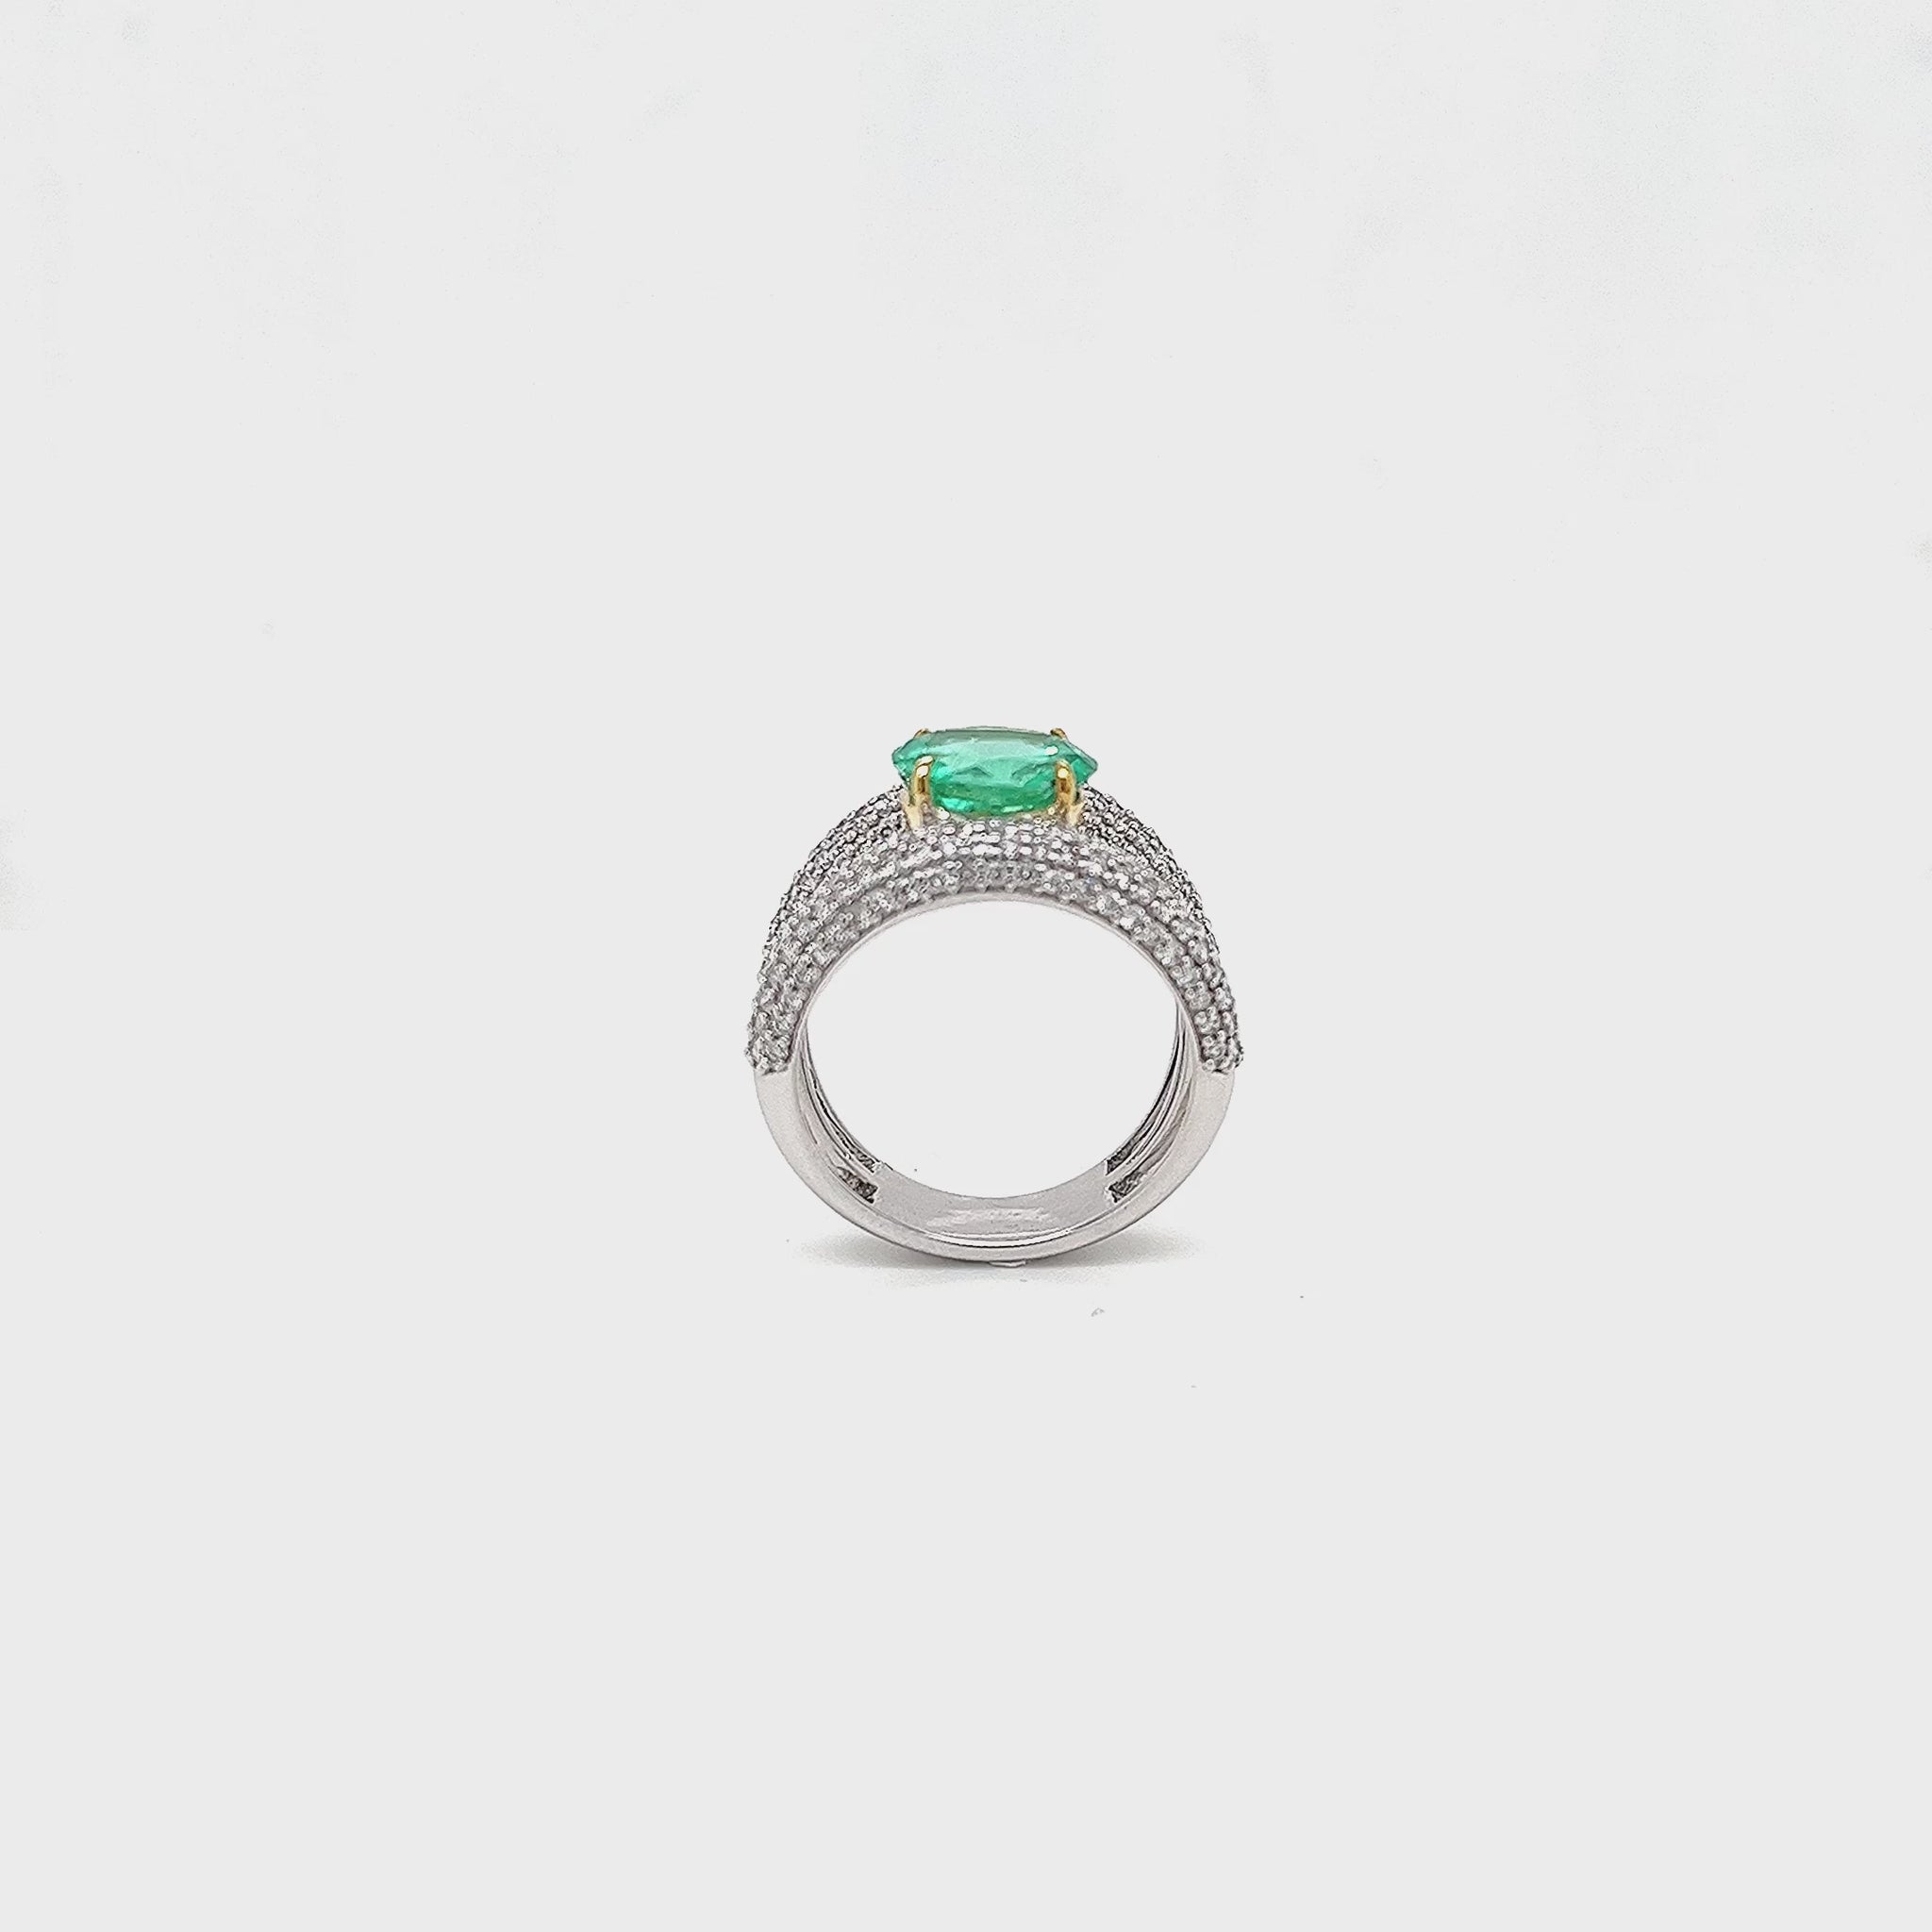 2.60ct Green Emerald and Diamond Ring" "Exquisite Green Emerald and Diamond Ring" "Captivating 2.60 Carat Emerald Ring" "Luxurious Green Gemstone Jewelry" "Elegant Emerald and Diamond Statement Ring" "High-Quality Precious Gemstone Ring" "Handcrafted Emerald and Diamond Jewelry" "Sophisticated Green Emerald Ring" "Dazzling Diamond Accents on Emerald Ring" "Fine Jewelry: Green Emerald and Diamonds"